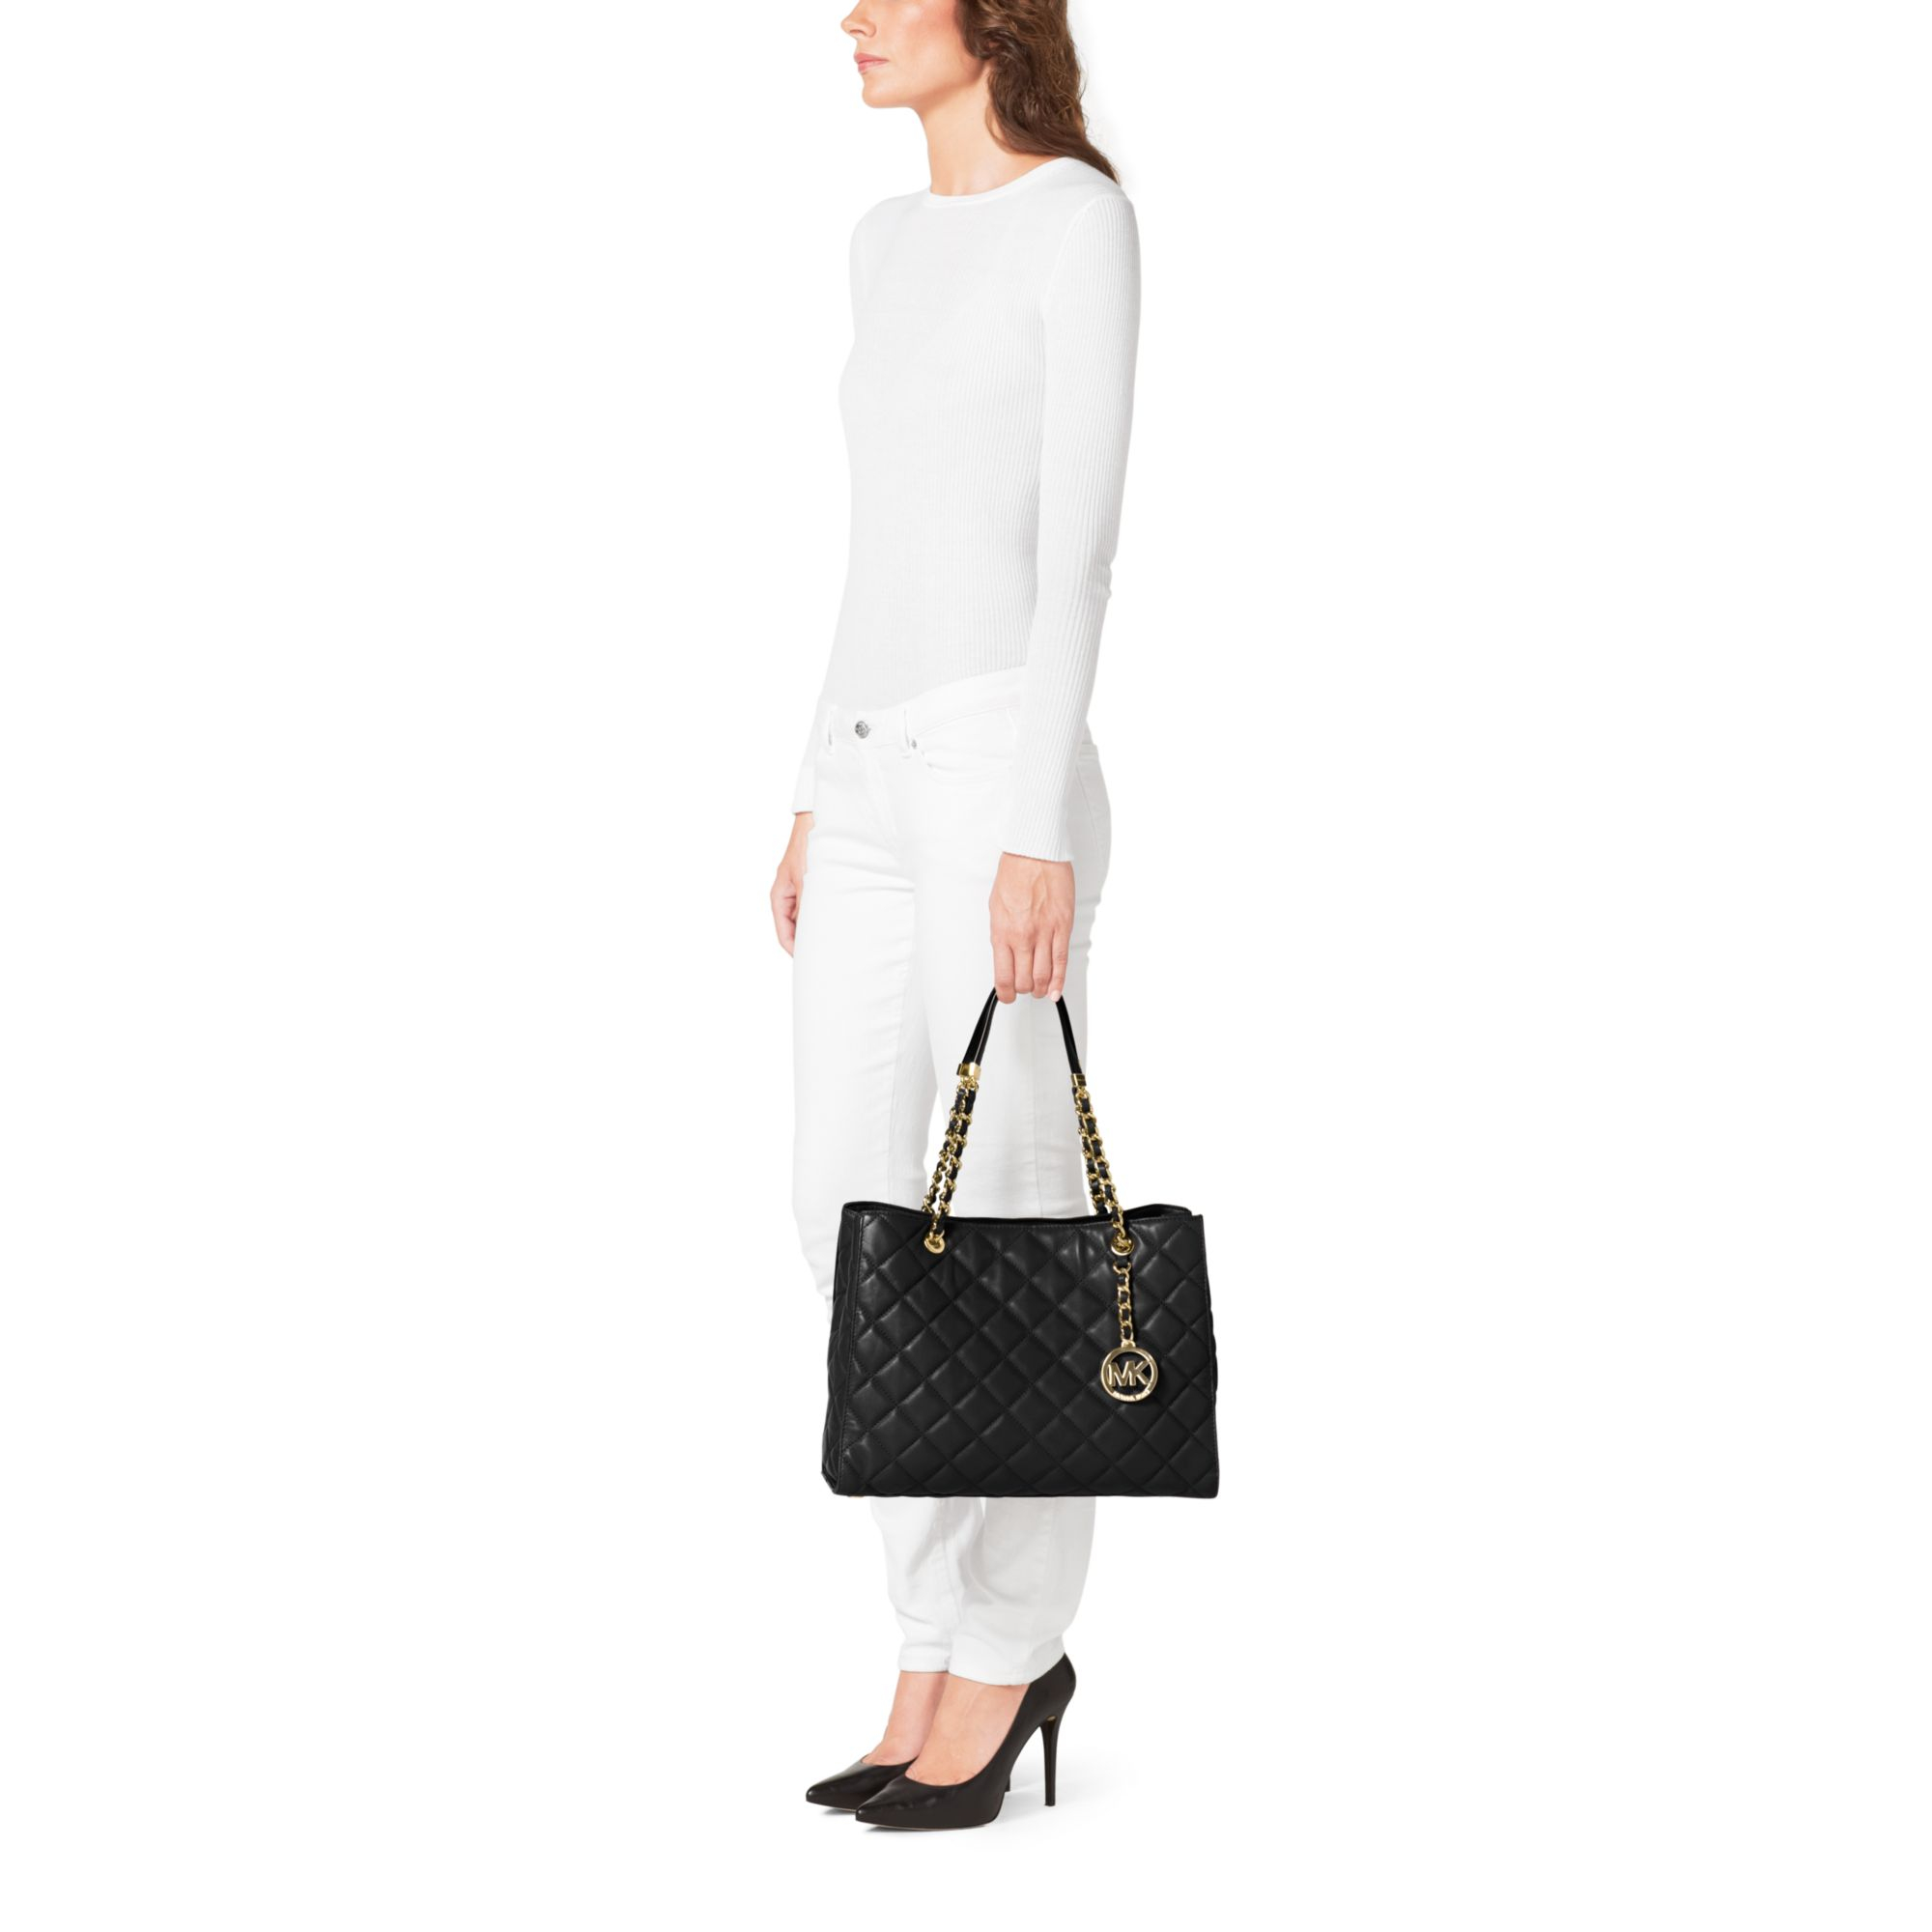 Michael Kors Quilted Leather Tote in Black - Lyst